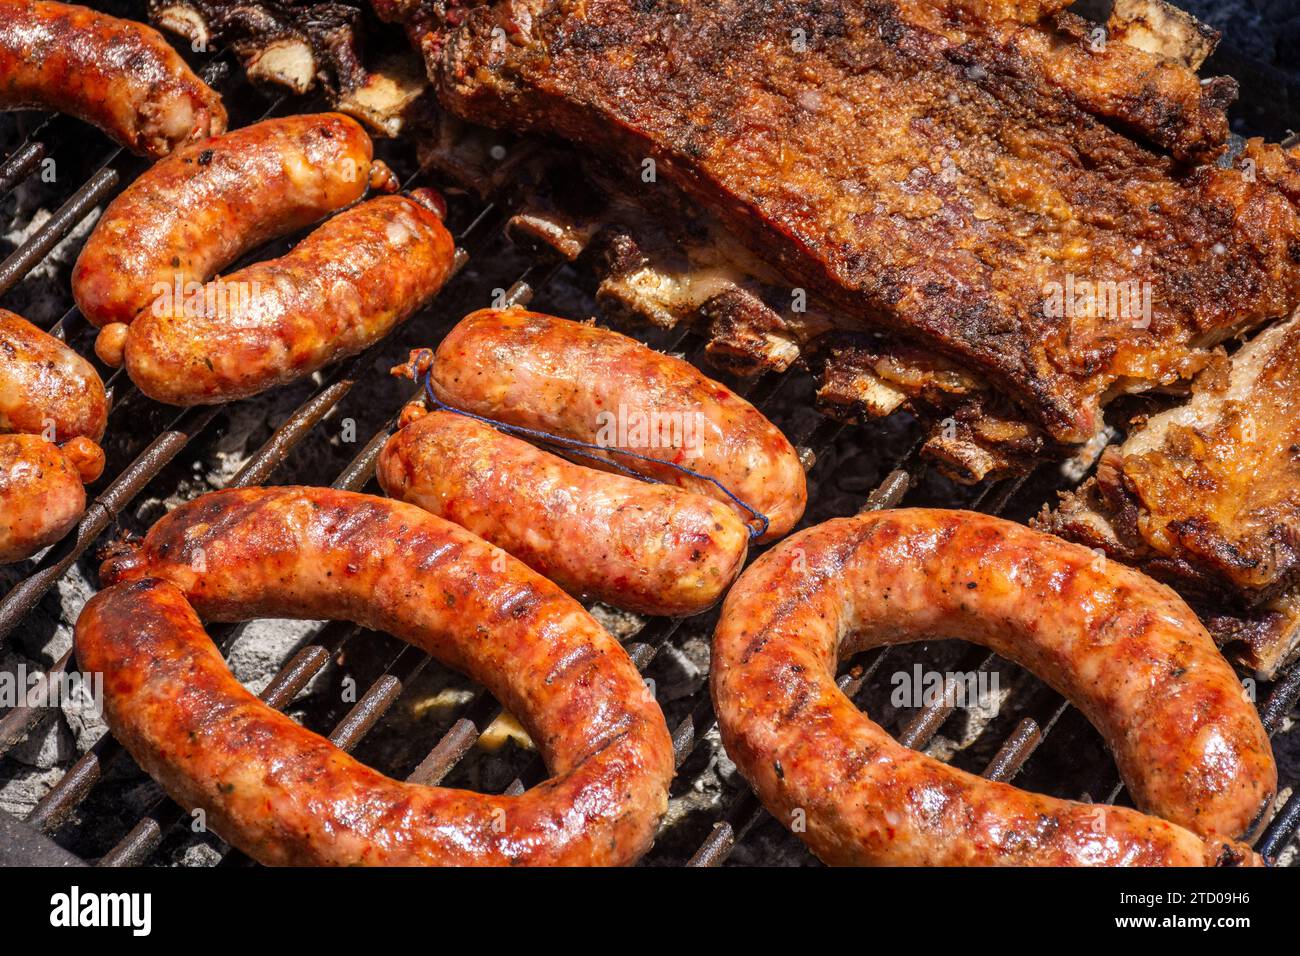 Typical gaucho barbecue with ribs and sausages in the countryside Stock Photo